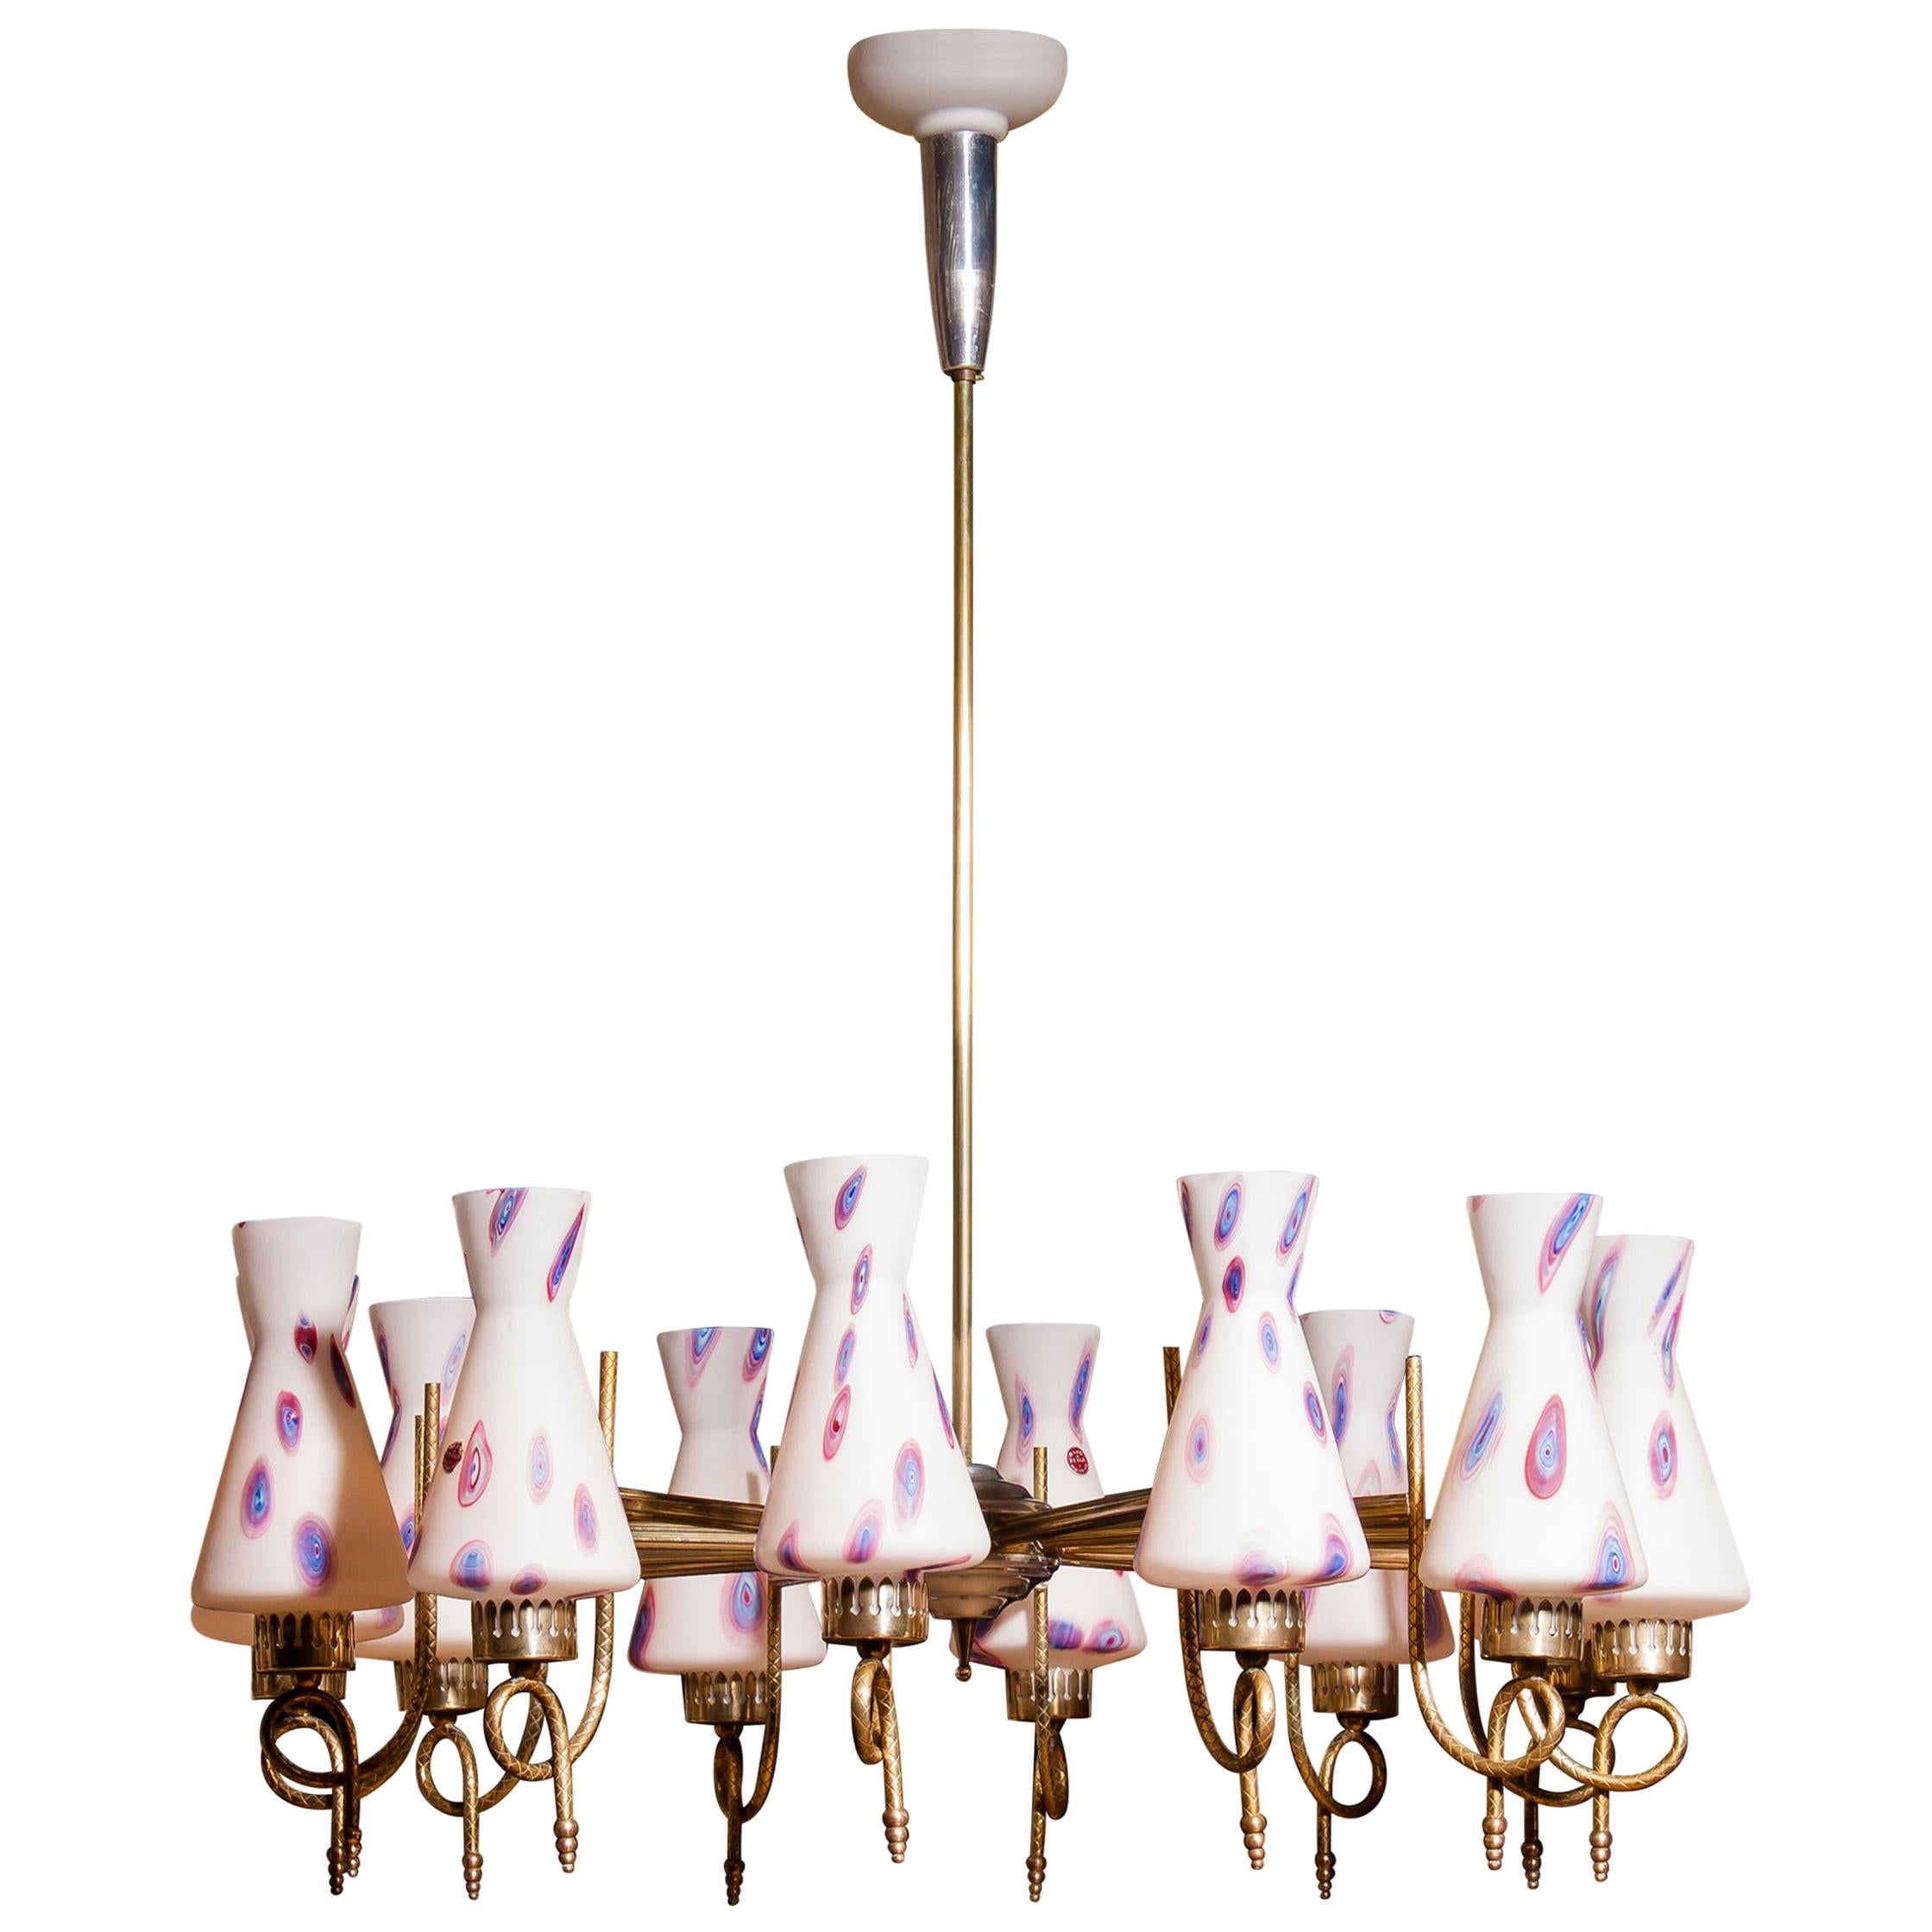 Magnificent large chandelier.
This lamp is made of a beautiful brass with polished aluminium shape with twelve white designed Murano glass shades and made by Stilnovo.
Dimensions: H 90 cm, ø 80 cm.
Technically 100%.